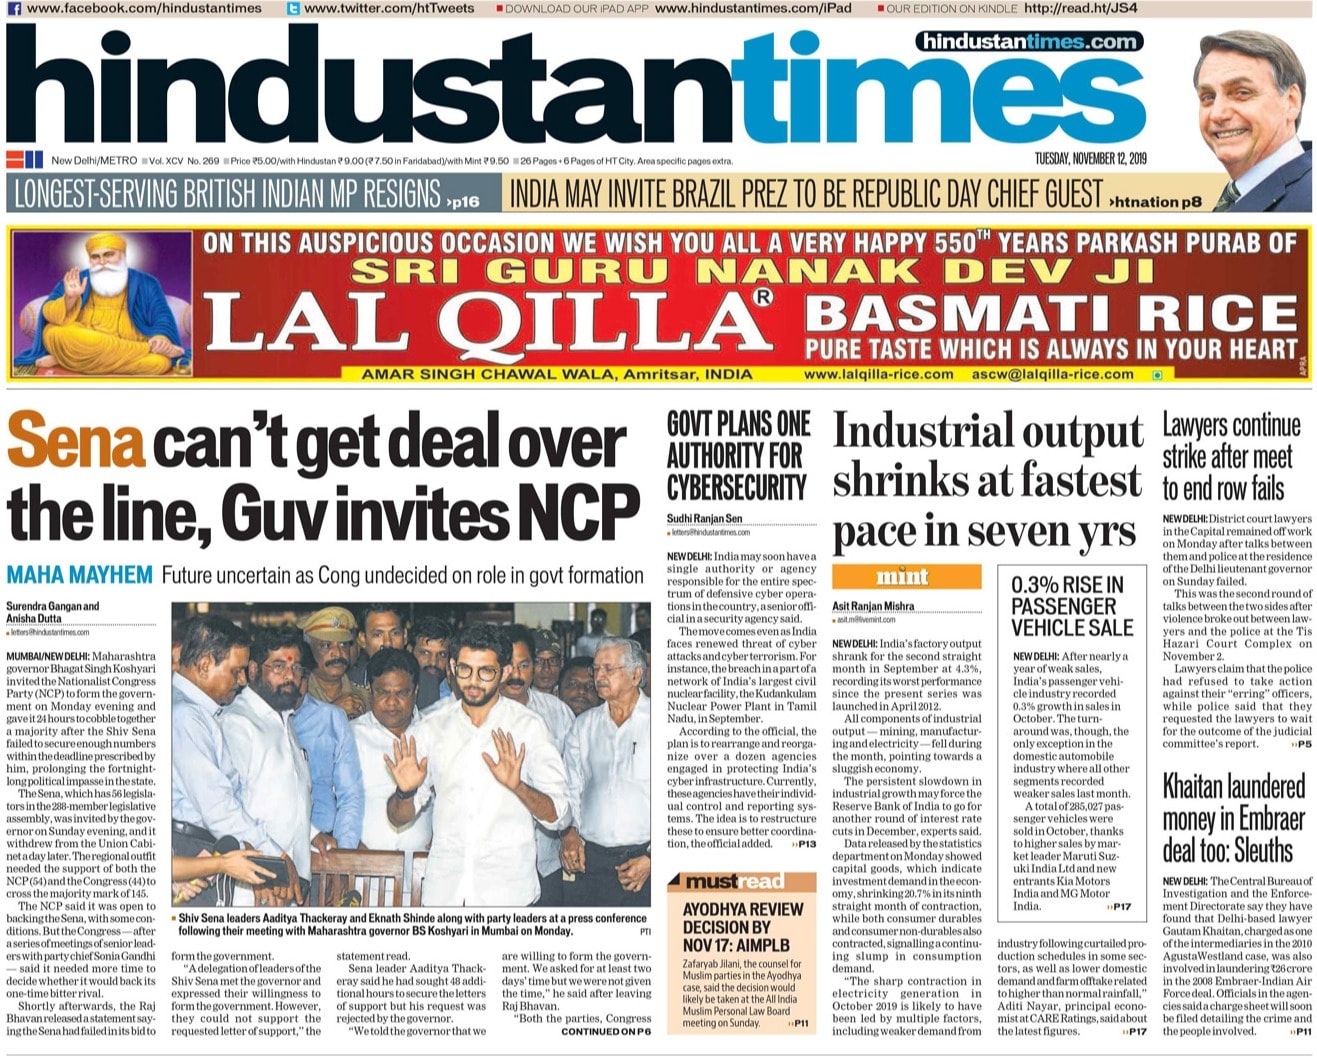 Newspaper Headlines: Maharashtra Governor Invites Ncp To Form Government, Other Big Stories